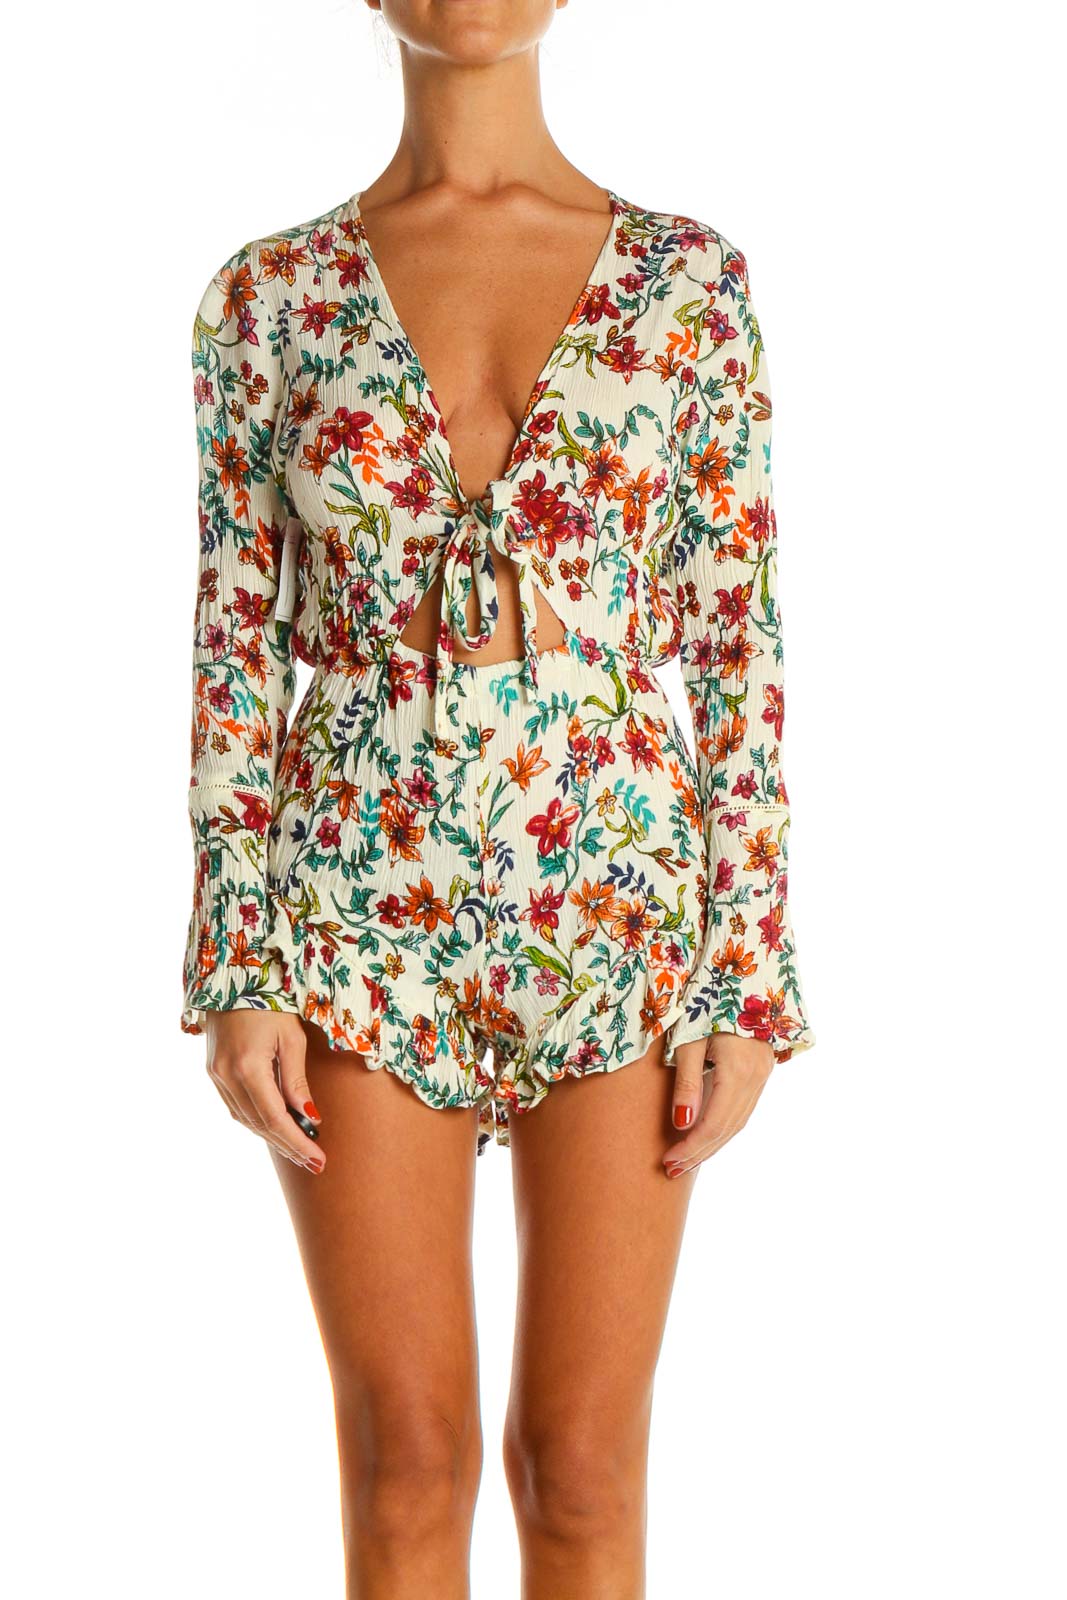 White Floral Romper Front